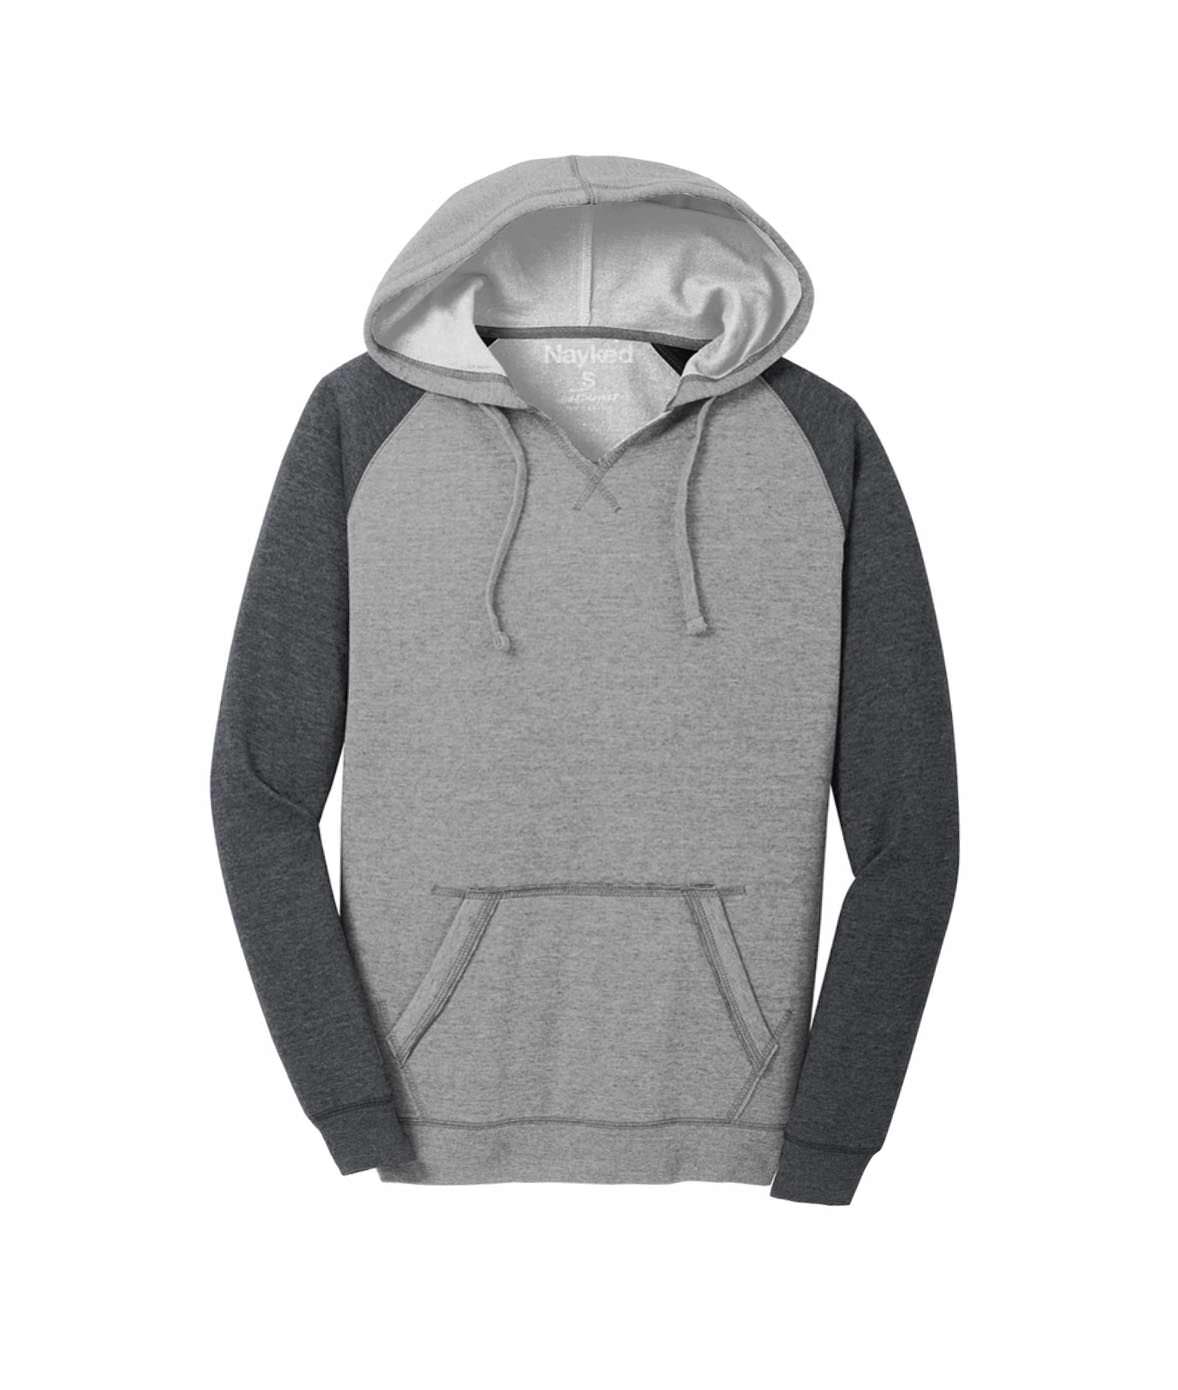 Nayked Apparel Women Real Women's Ridiculously Soft Plus Raglan Fleece Hoodie Grey/Charcoal / 3X-Large / NAY-D-96DT2-C